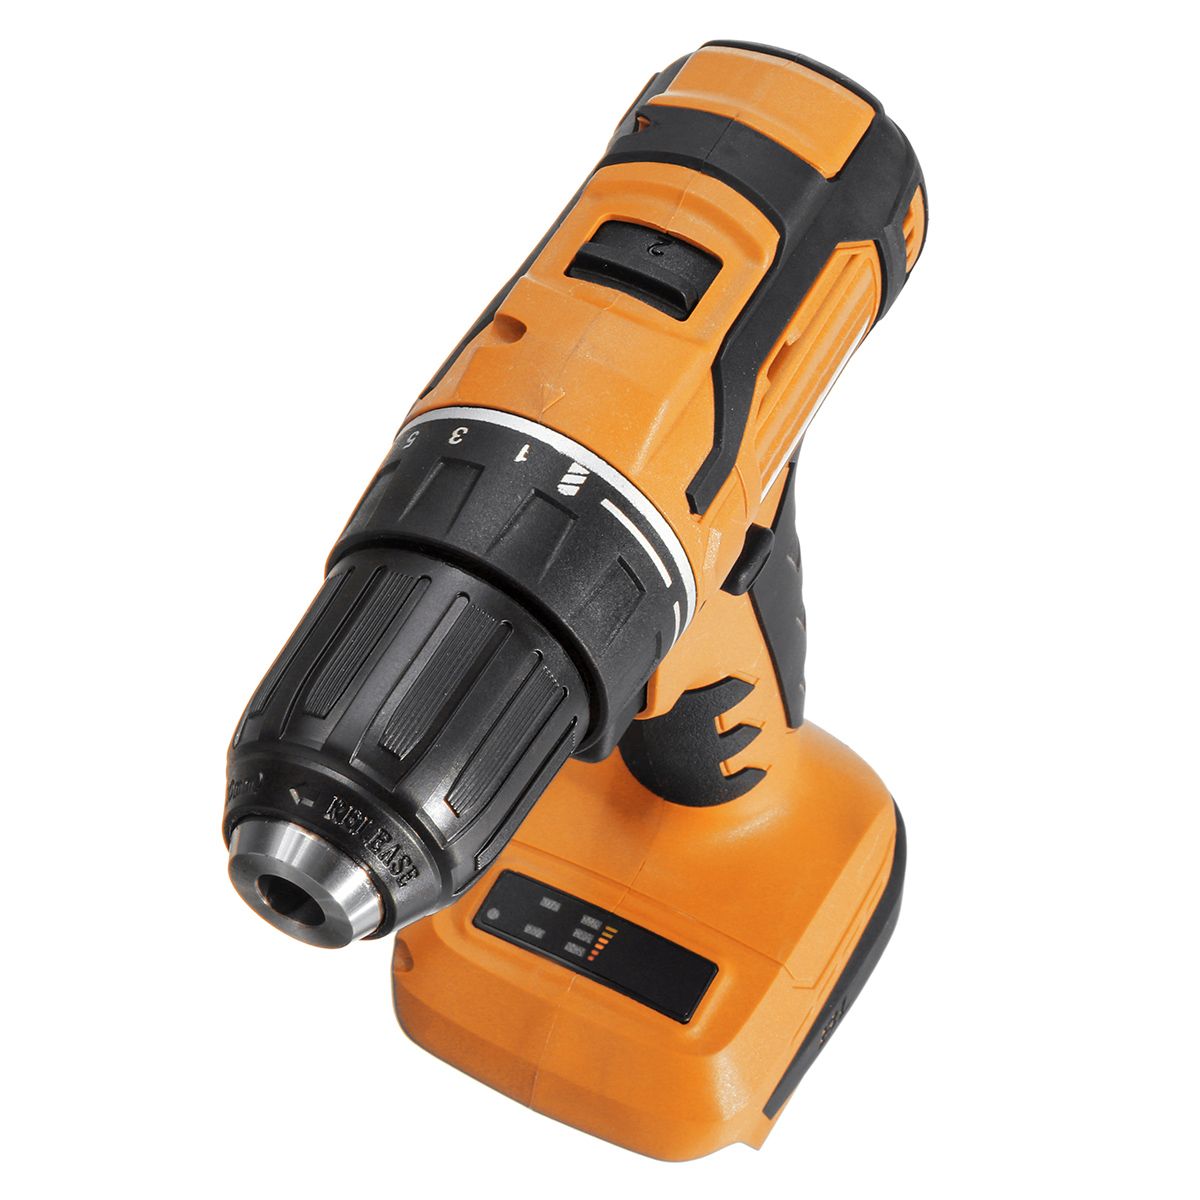 1800rpm-12quot-Cordless-Electric-Drill-Screwdriver-with-LED-Working-Light-211-Stage-Setting-Mode-1672883